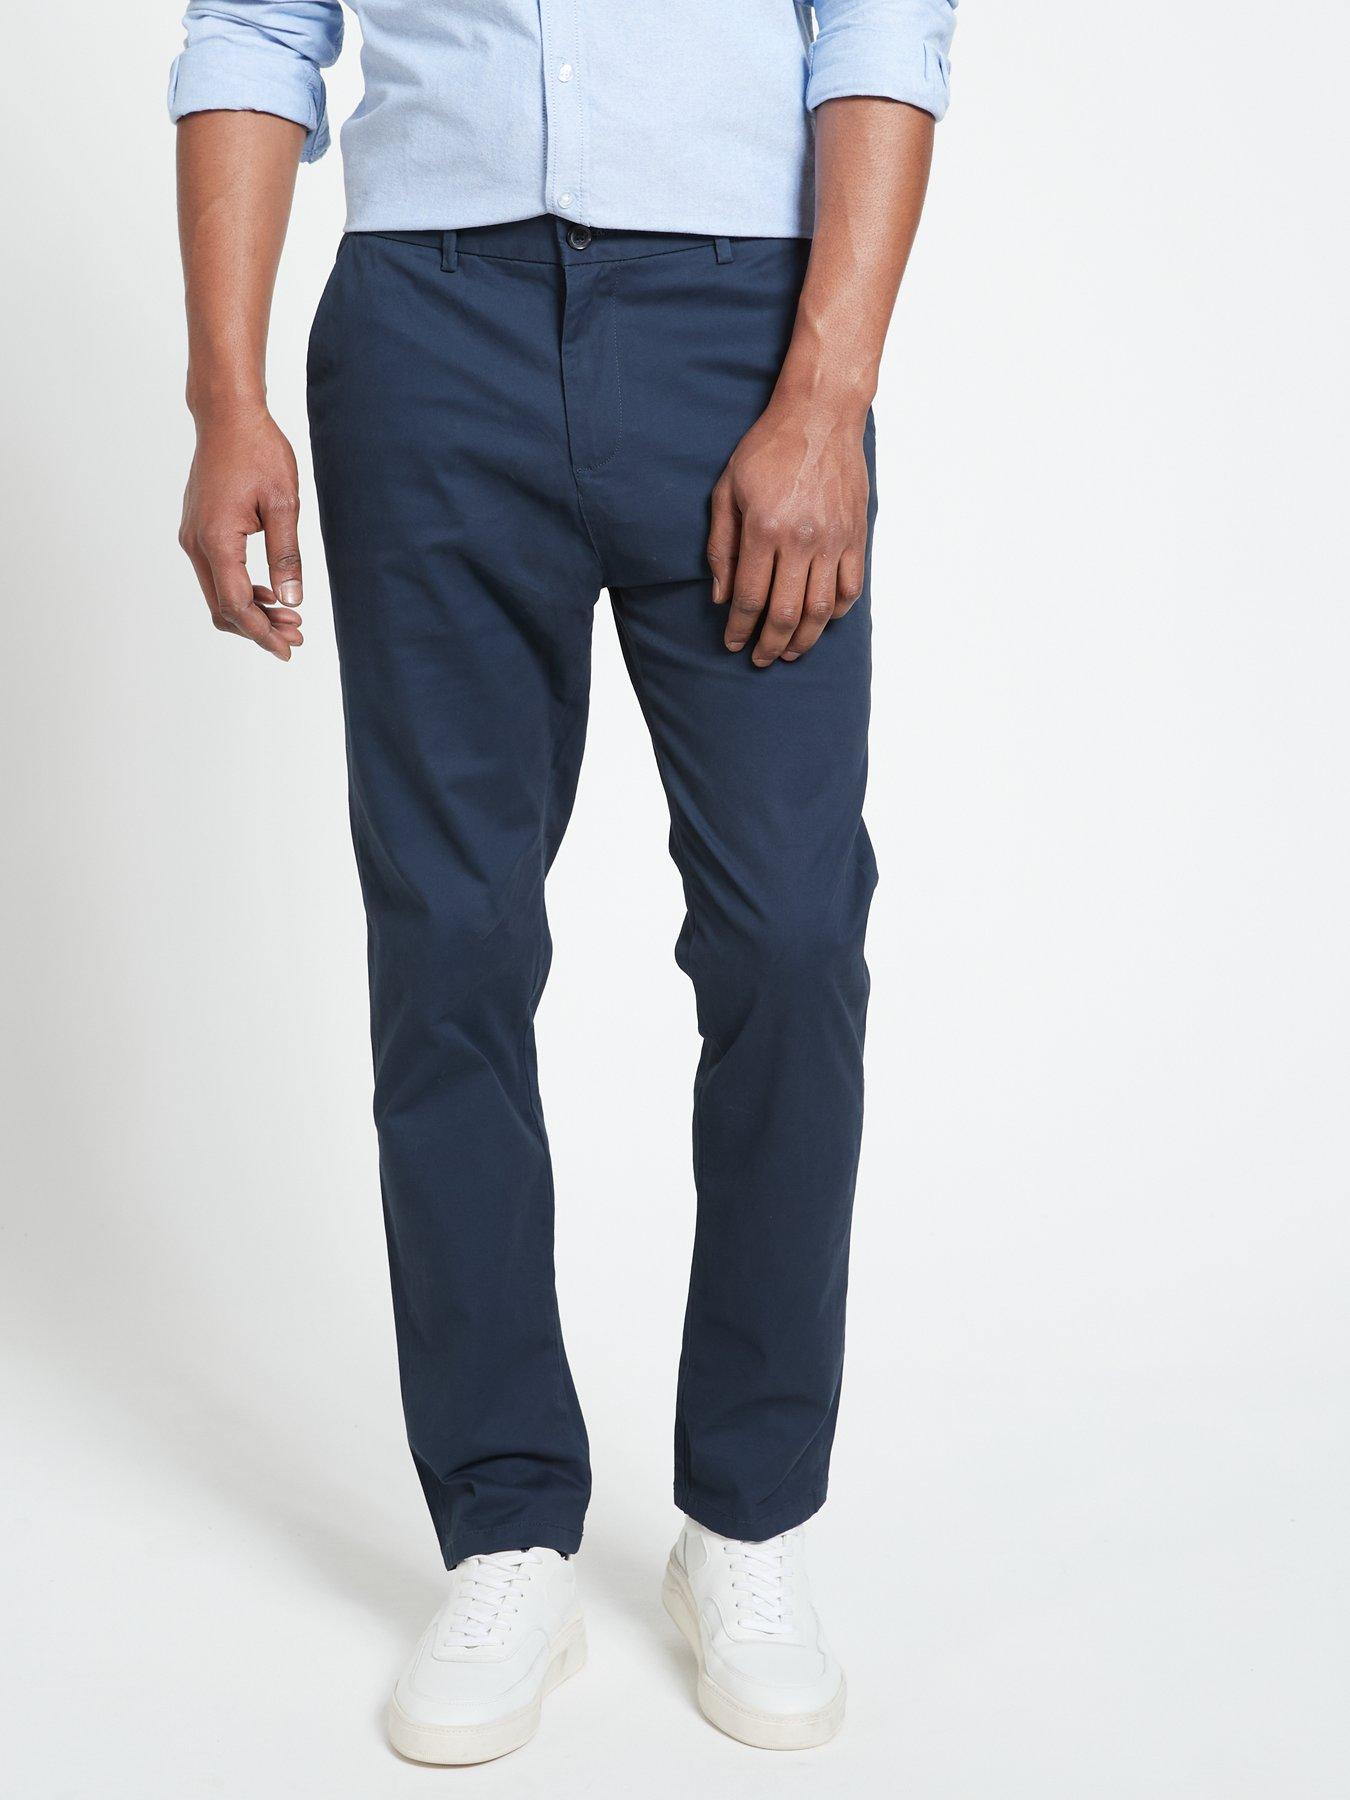 Lululemon Commission Pant Slim (28 x 32) in Navy, Men's Fashion, Bottoms,  Chinos on Carousell